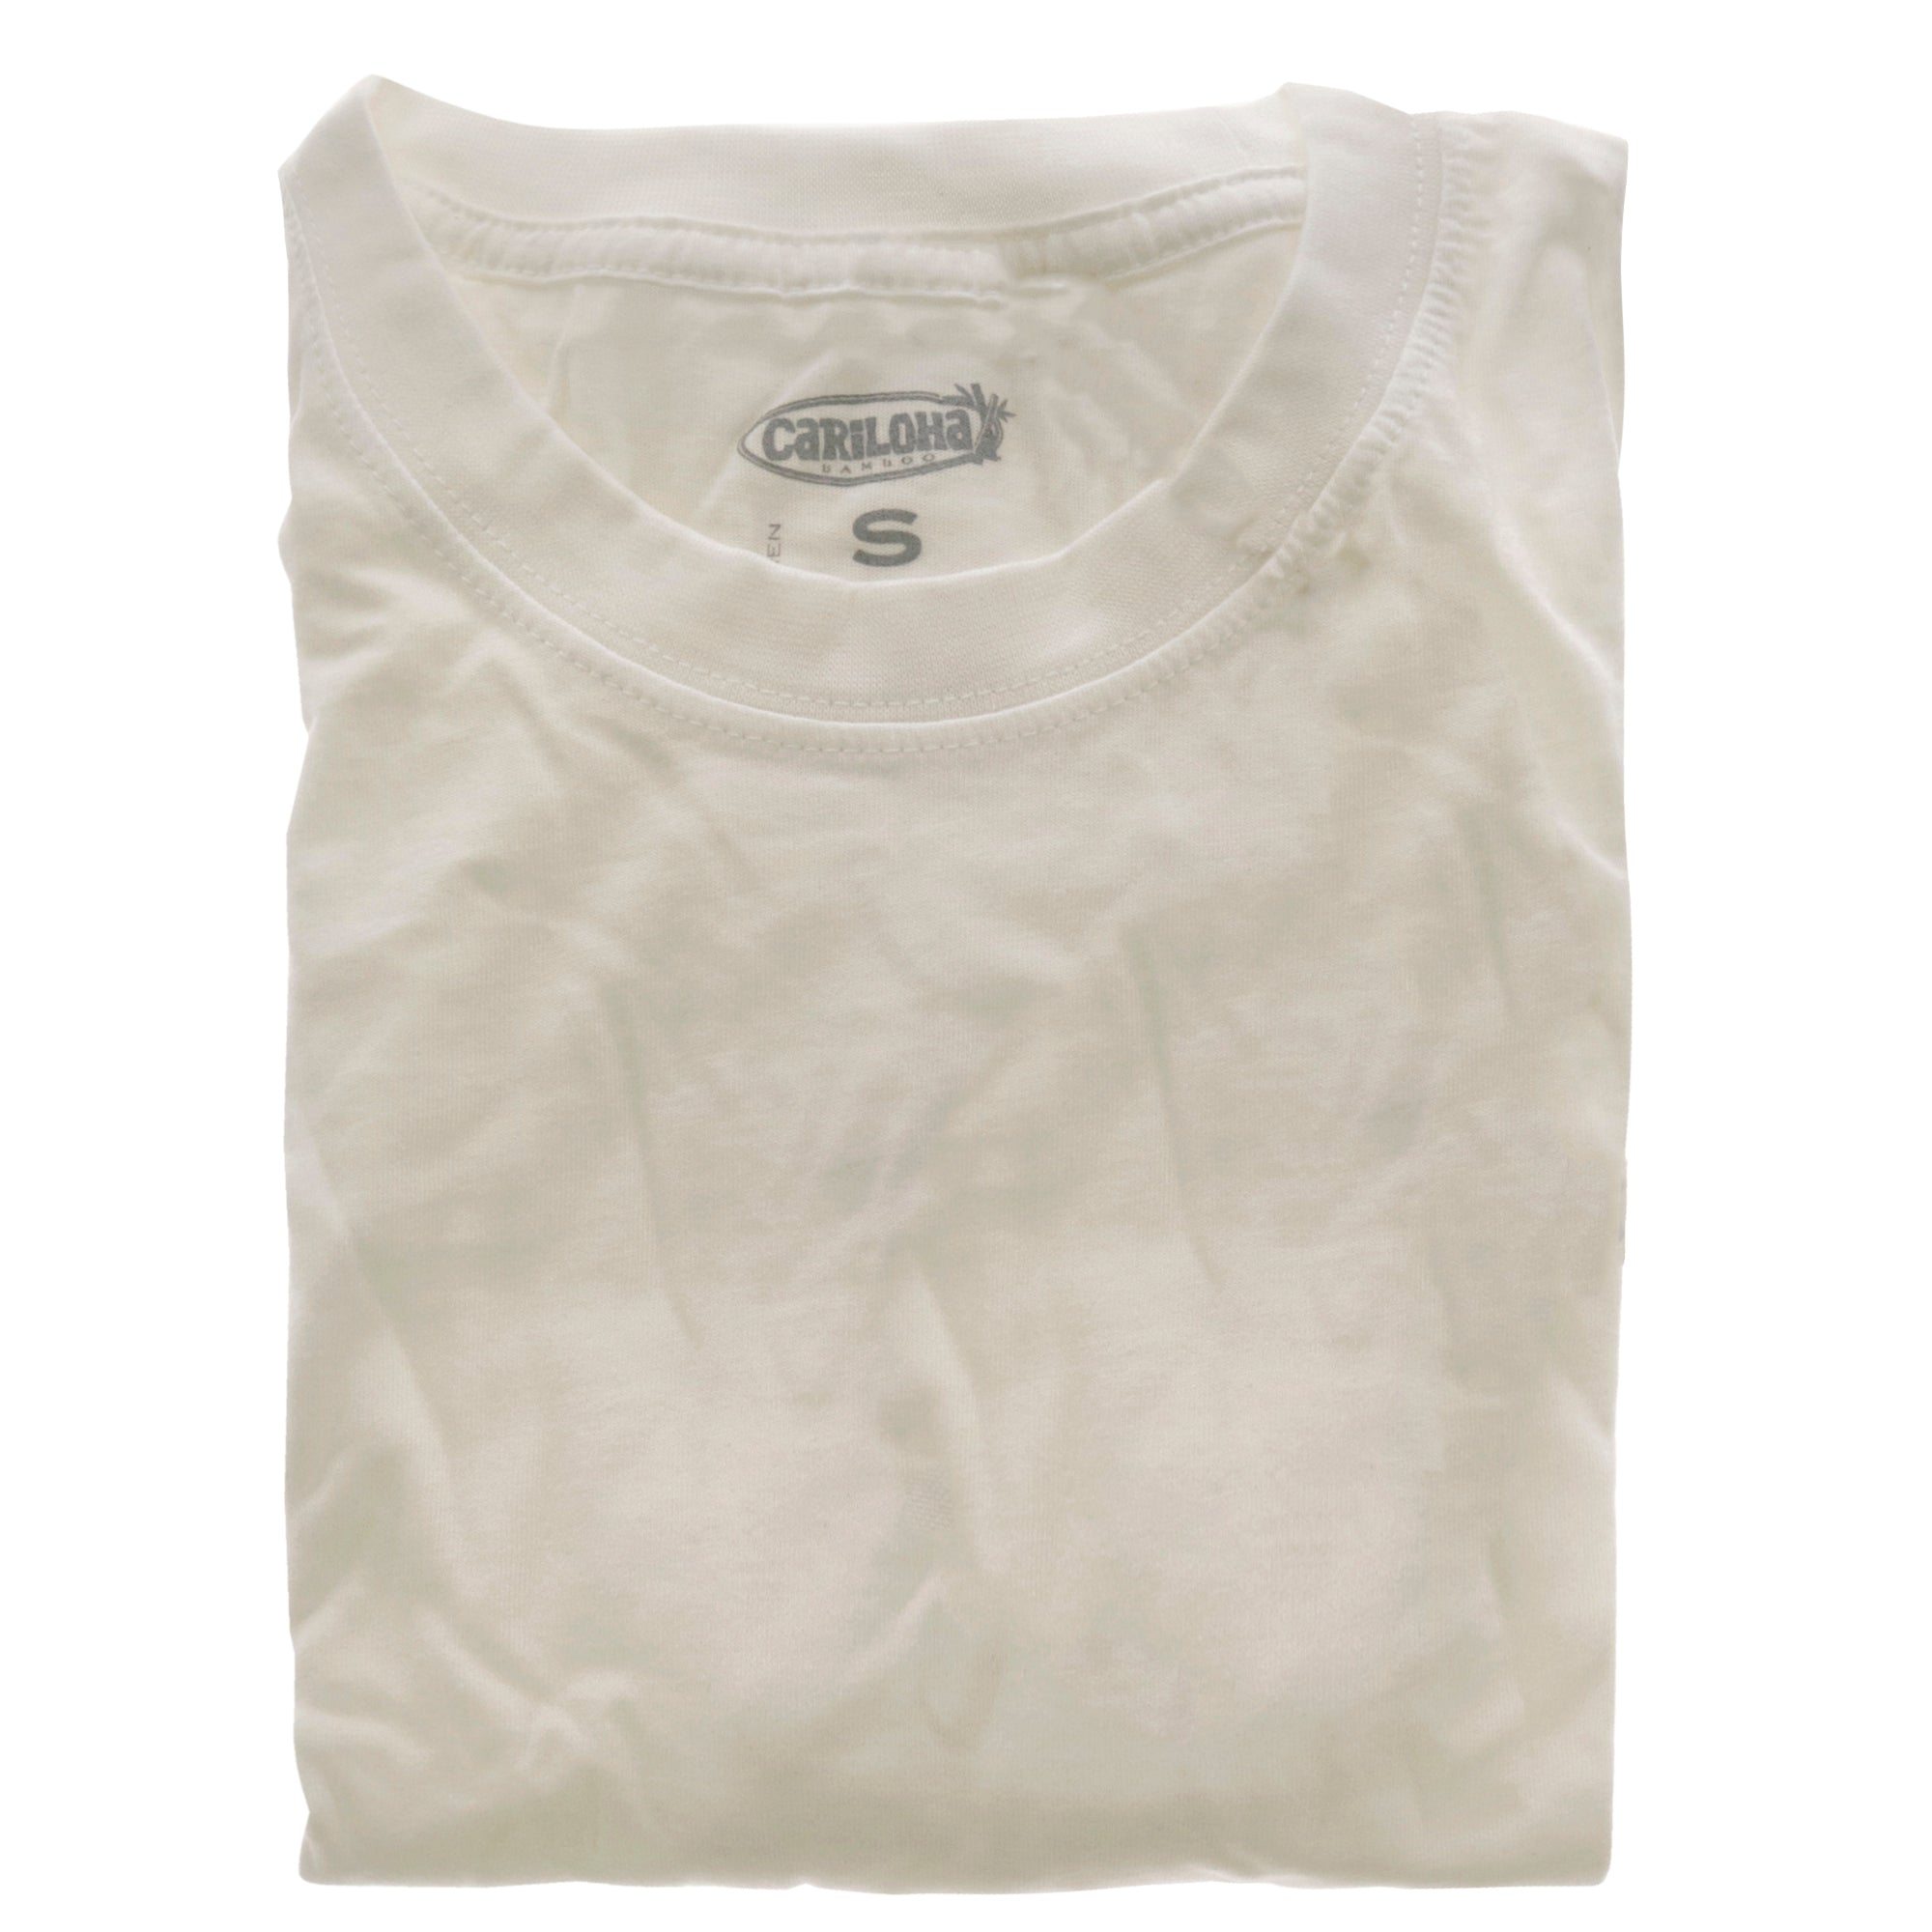 Bamboo Crew Tee - White by Cariloha for Men - 1 Pc T-Shirt (S)